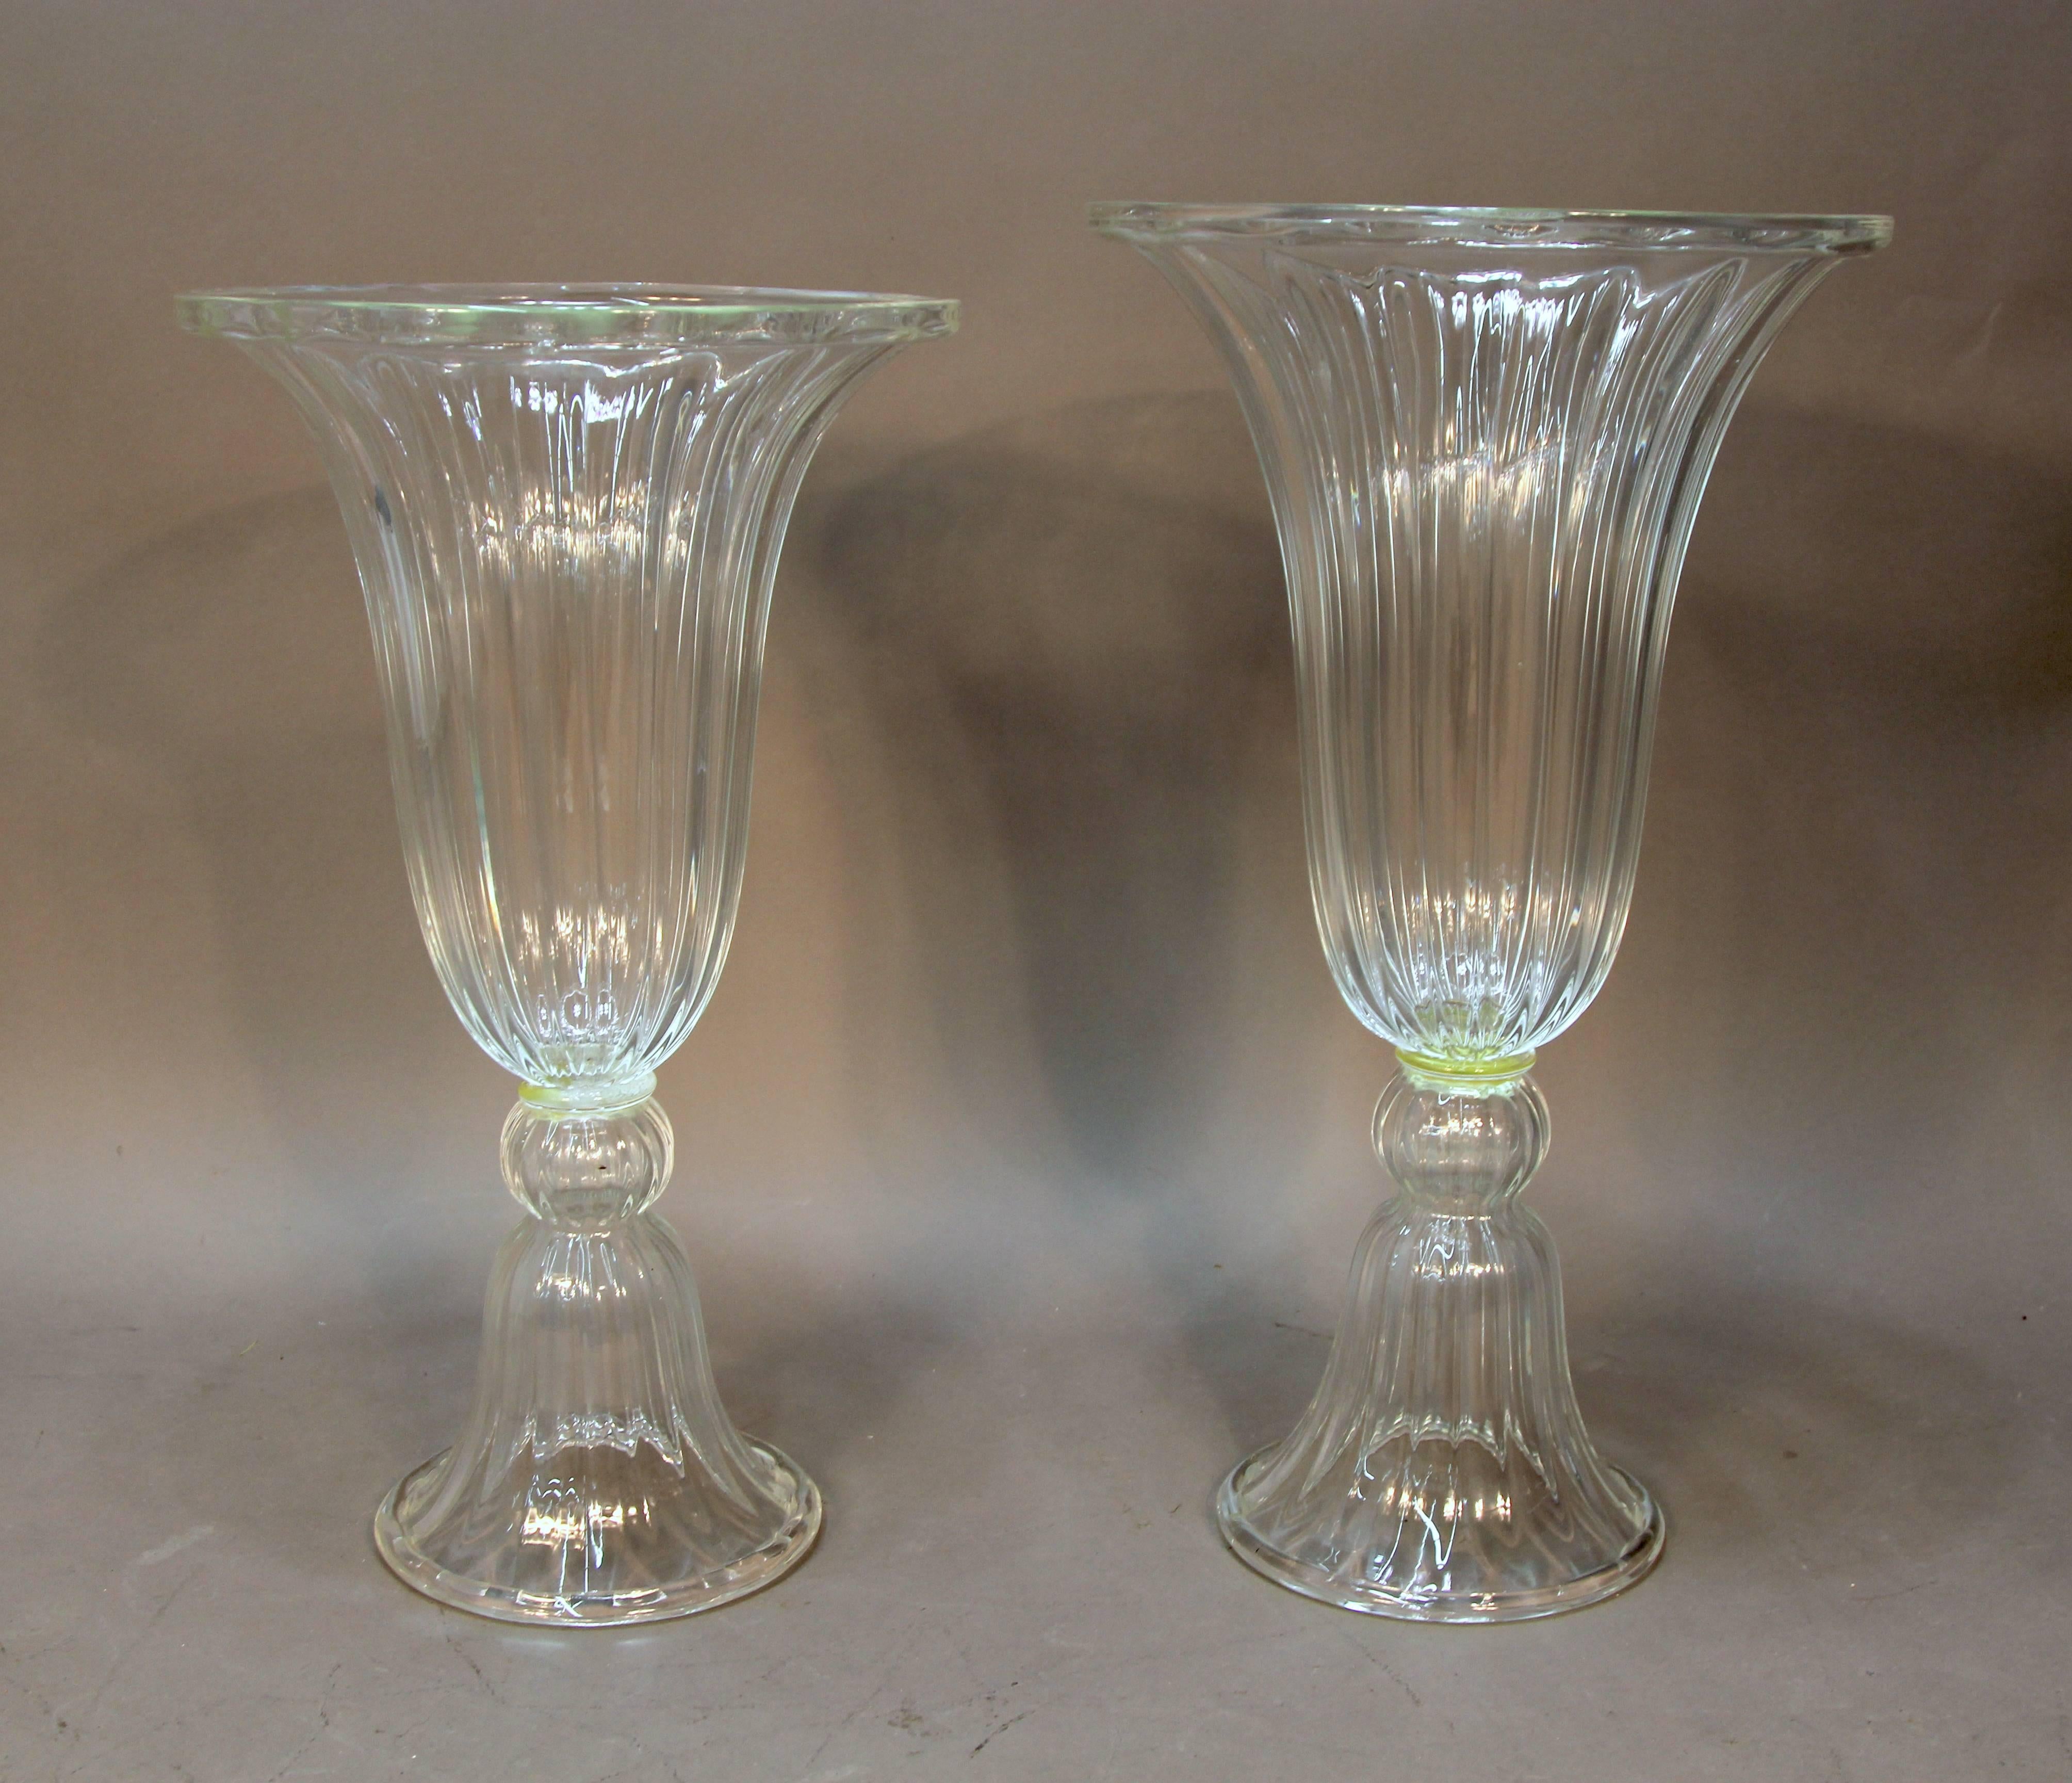 Substantial and deeply fluted glass vases with slight size variations typical of hand blow glass pairs. They are statement pieces, that would be equally at home on a modern credenza or in niches in a traditional environment. Out of a New York City